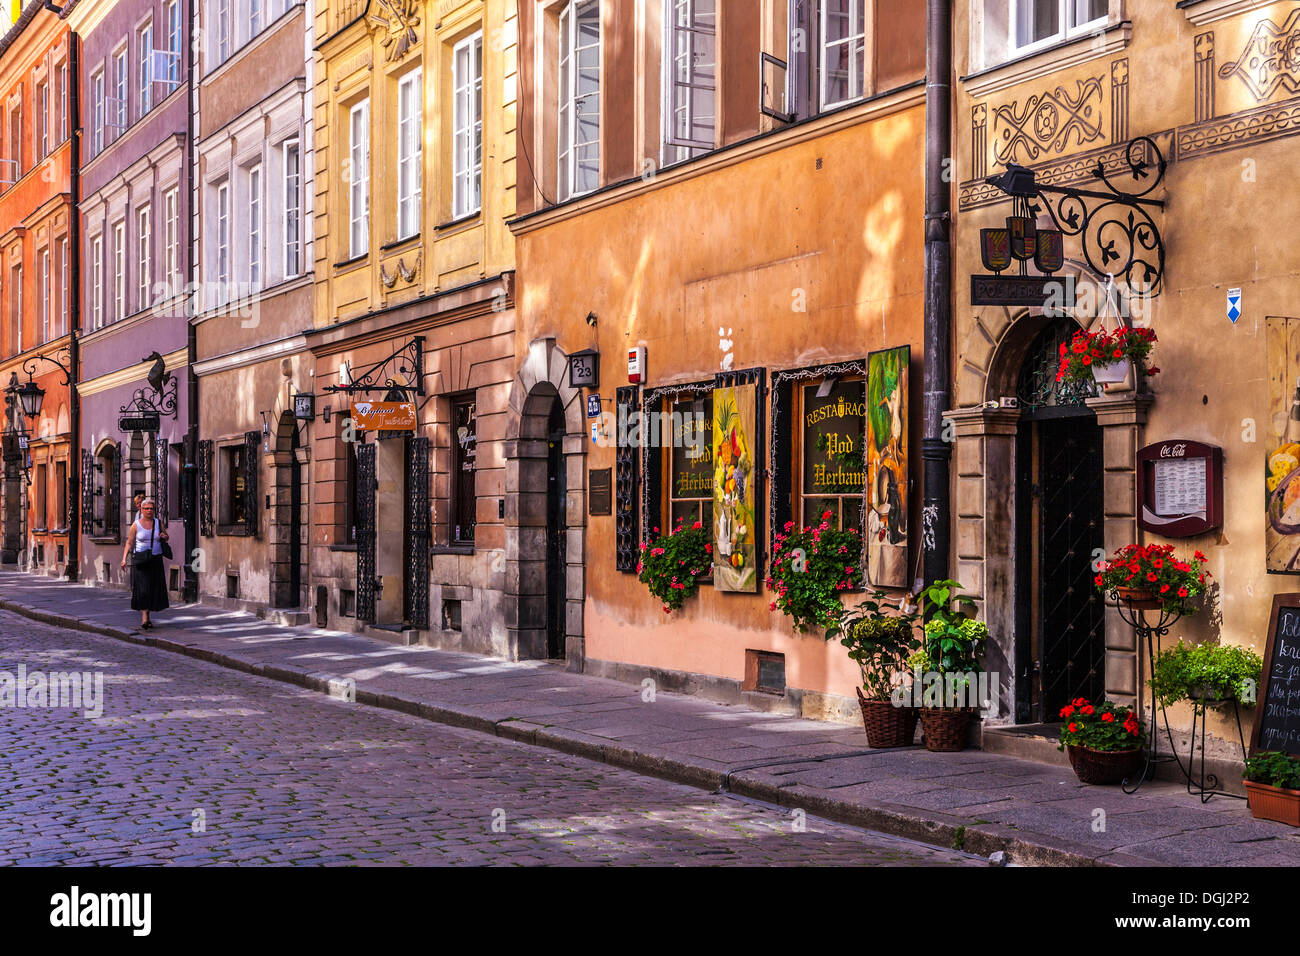 A small cobbled street in the historic district of Stare Miasto in Warsaw. Stock Photo